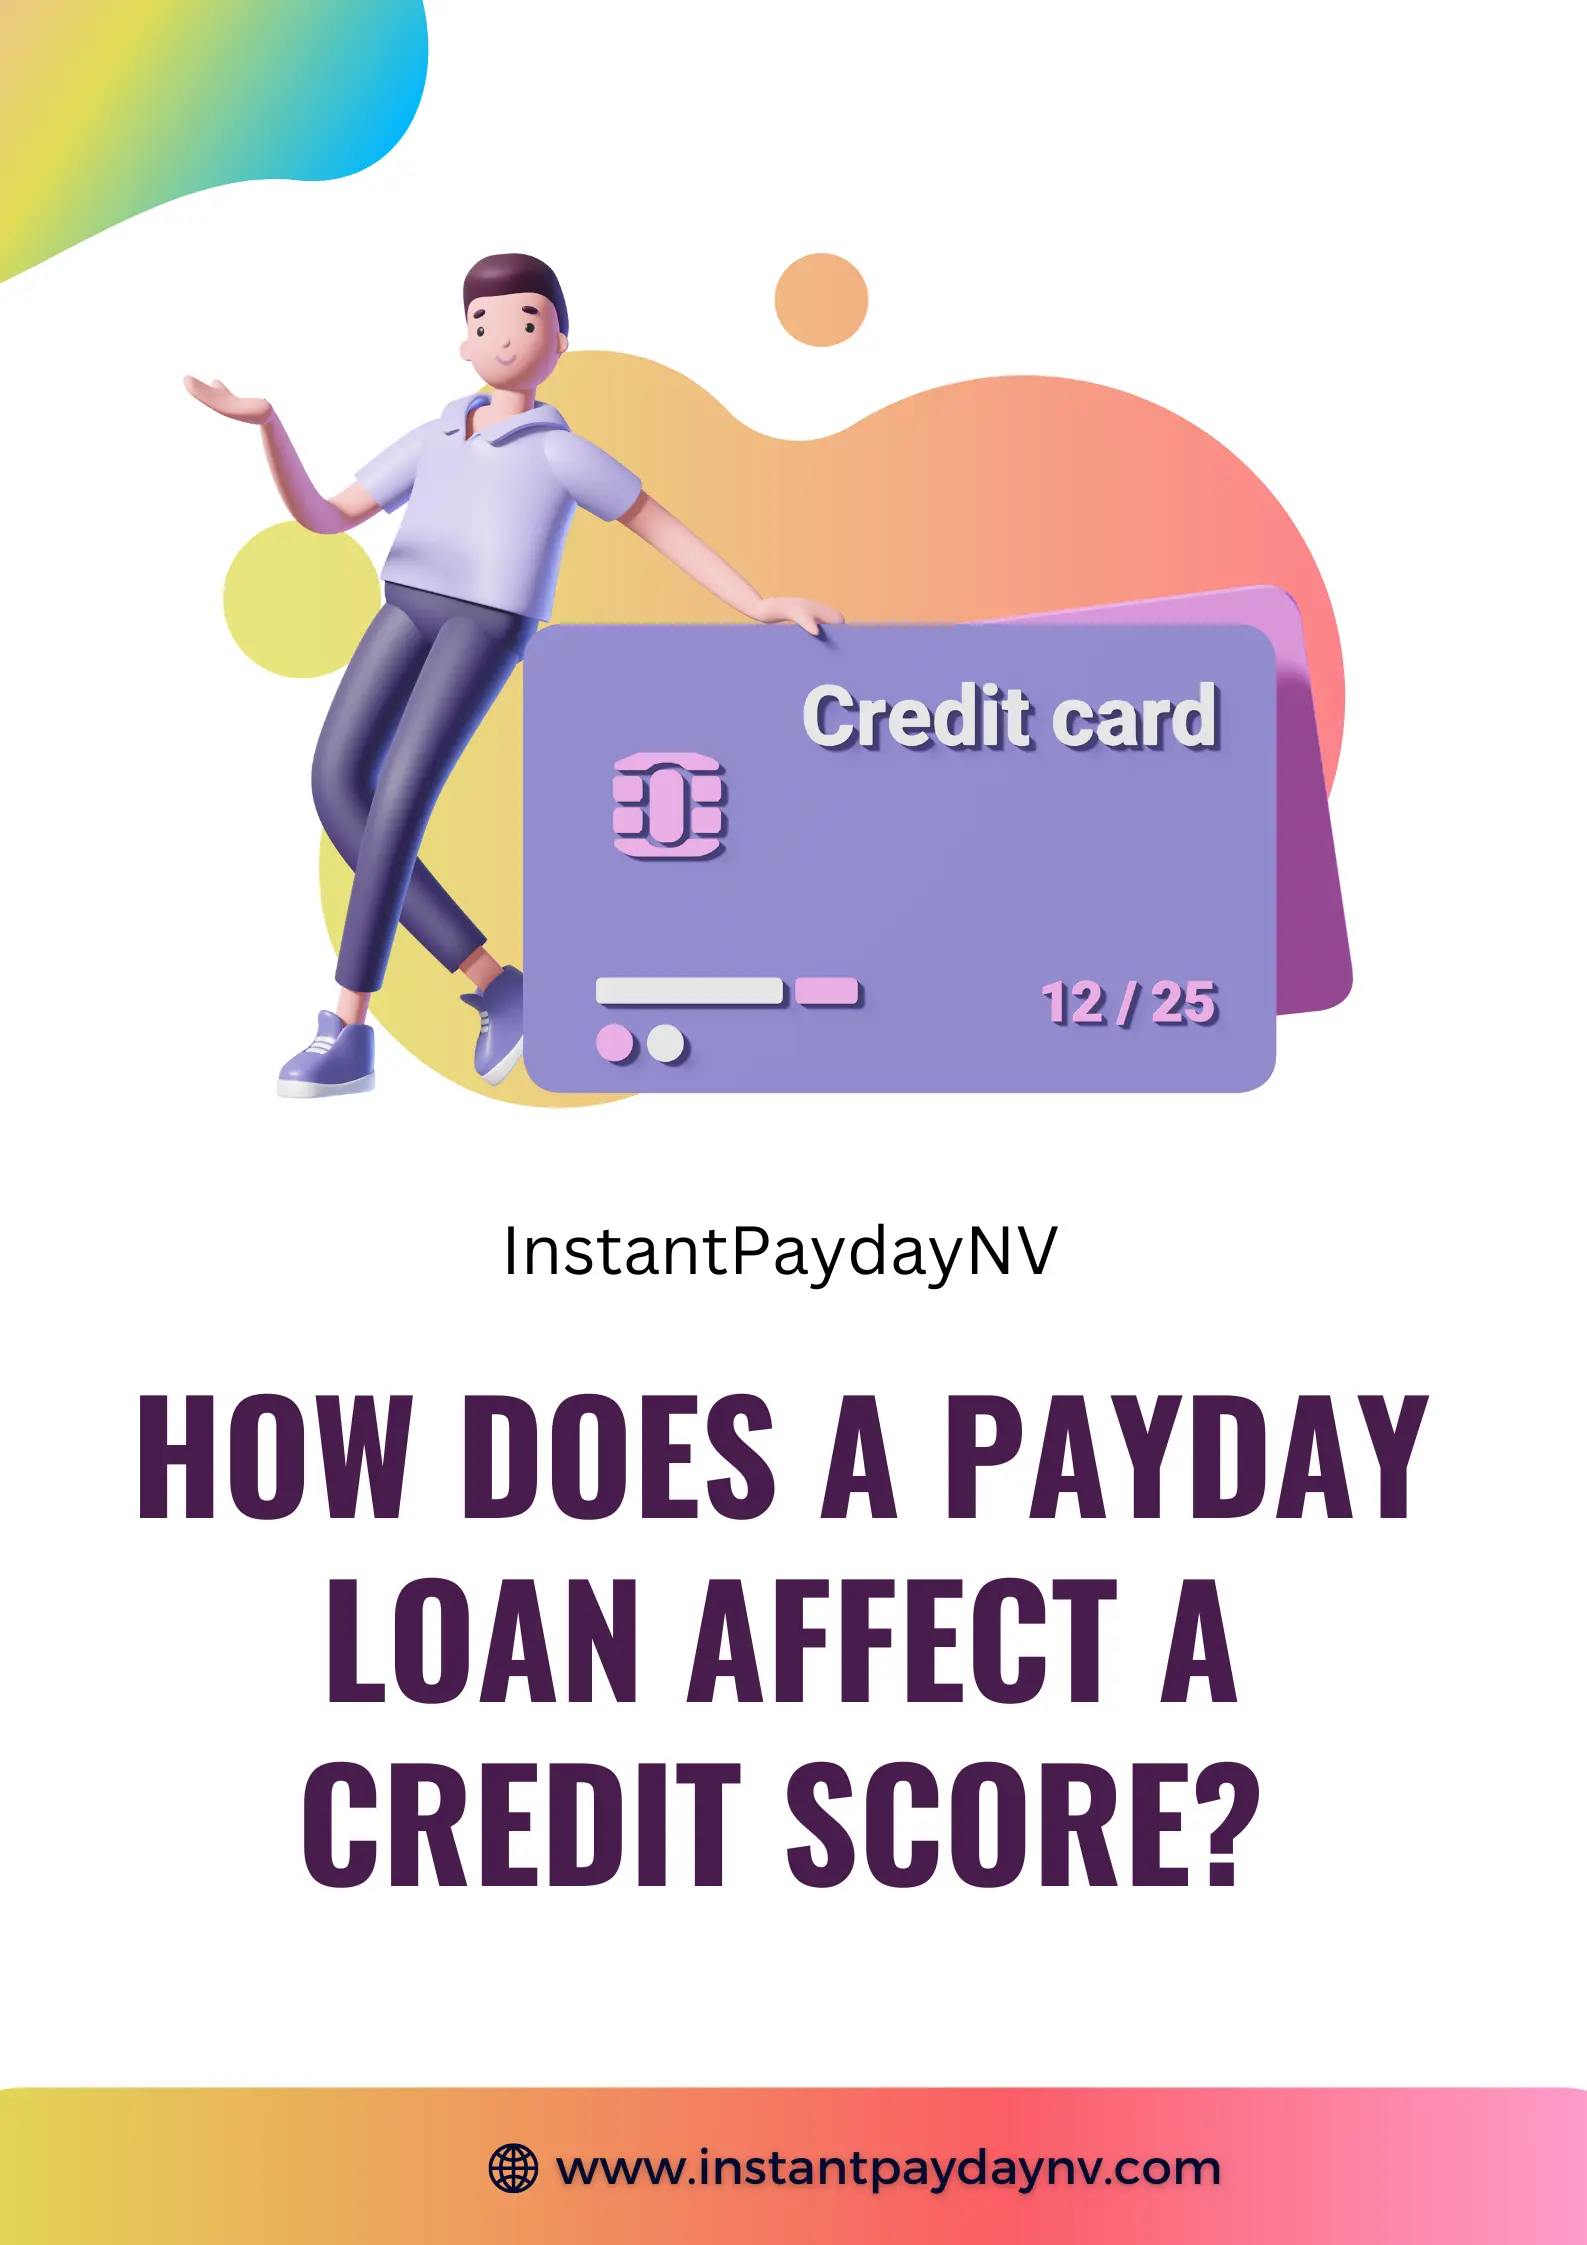 How does a payday loan affect a credit score